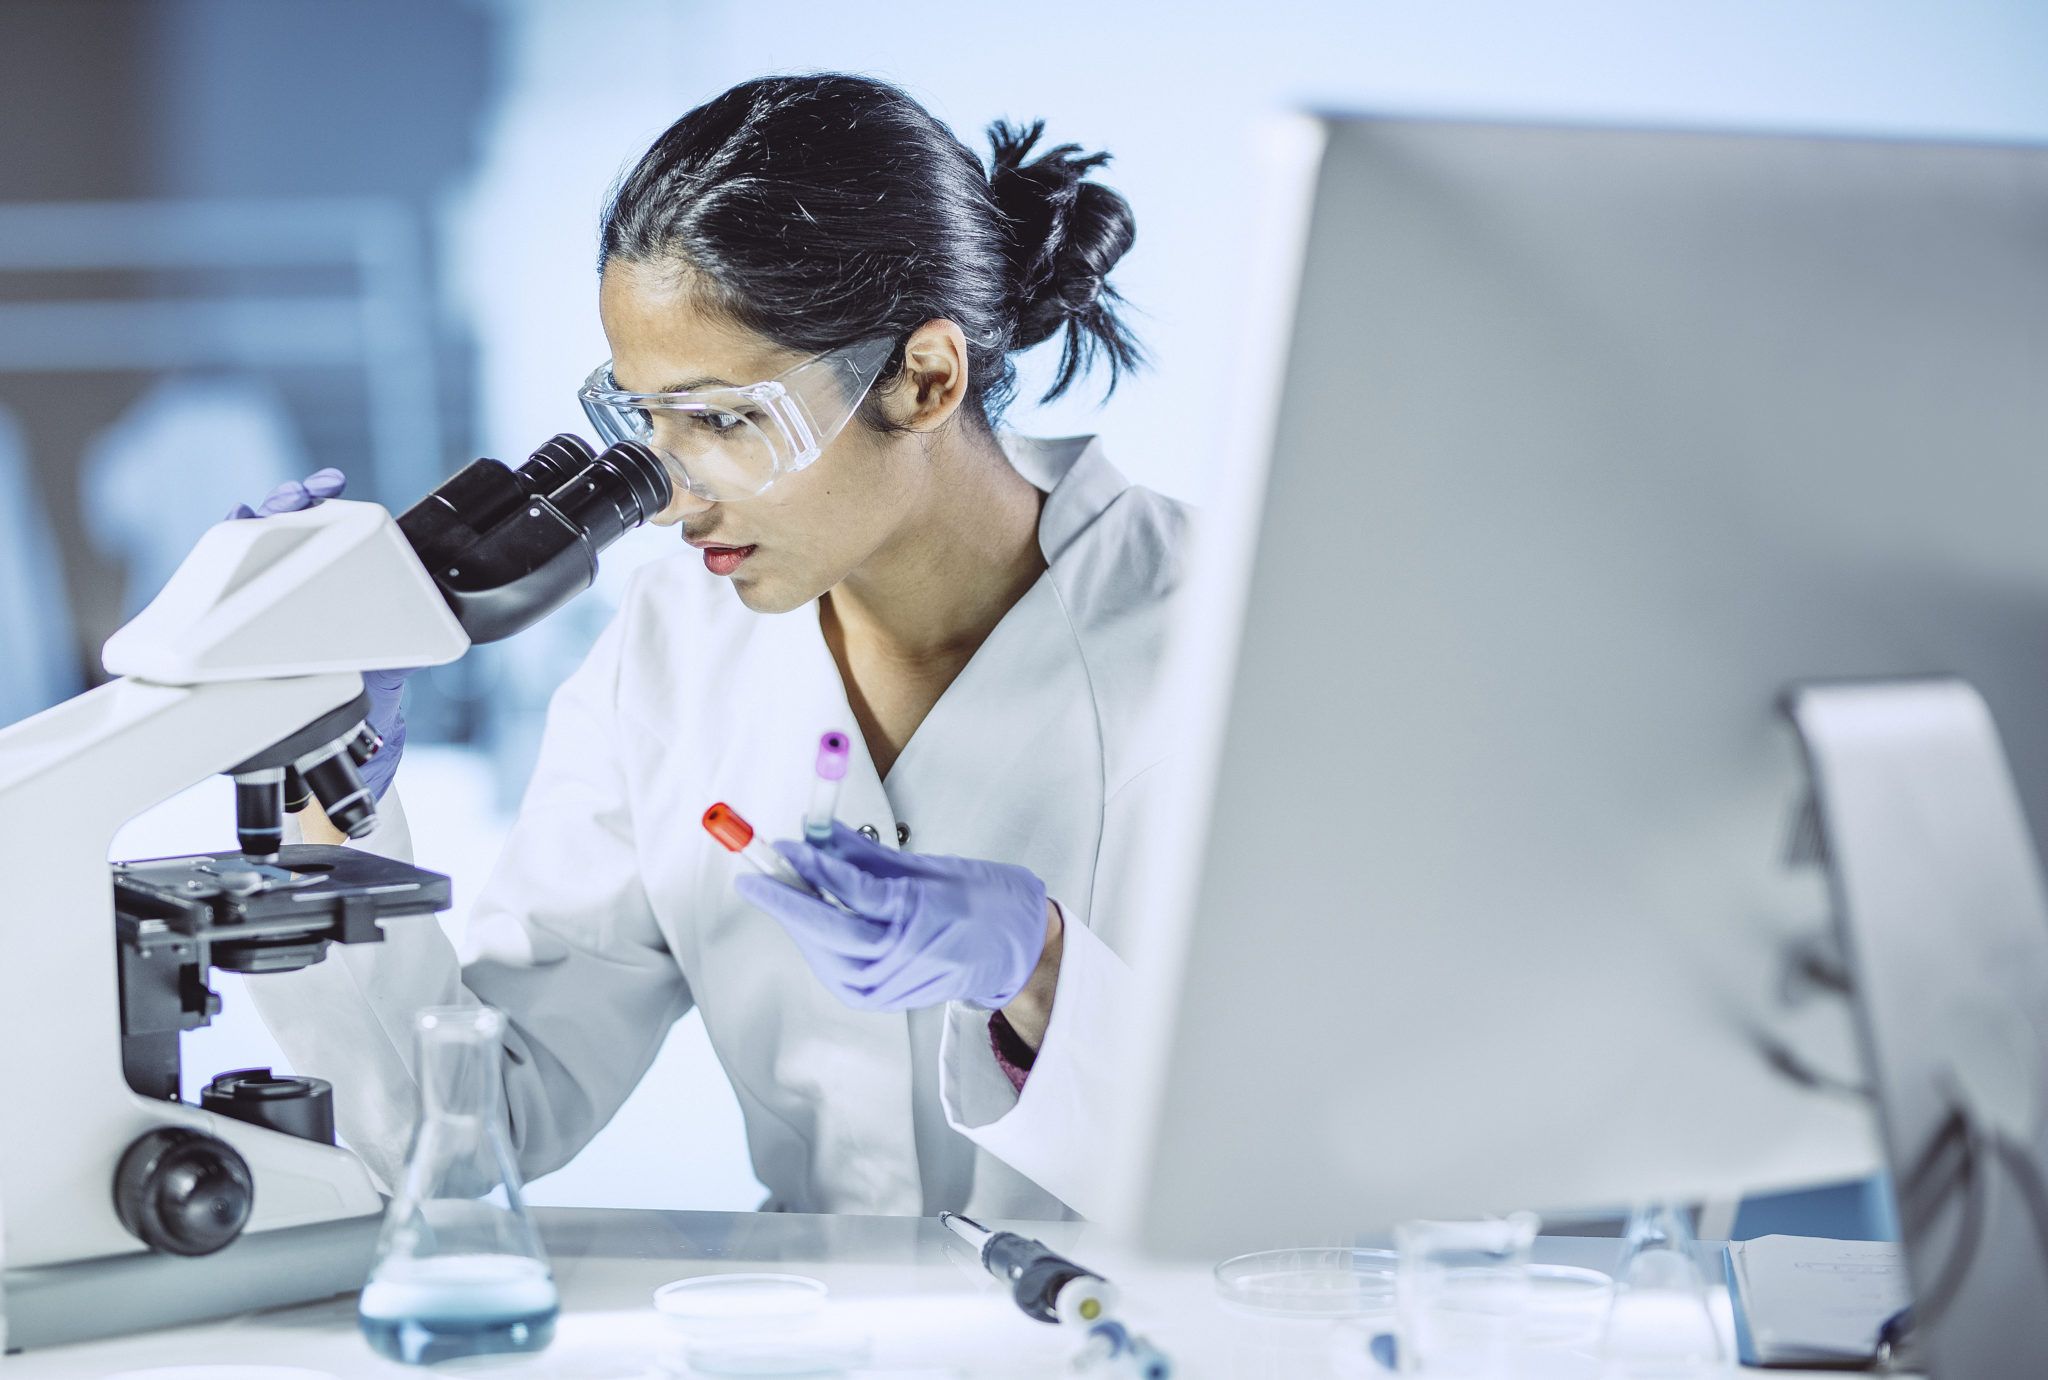 What Jobs Could I Do In Life Sciences? .uk